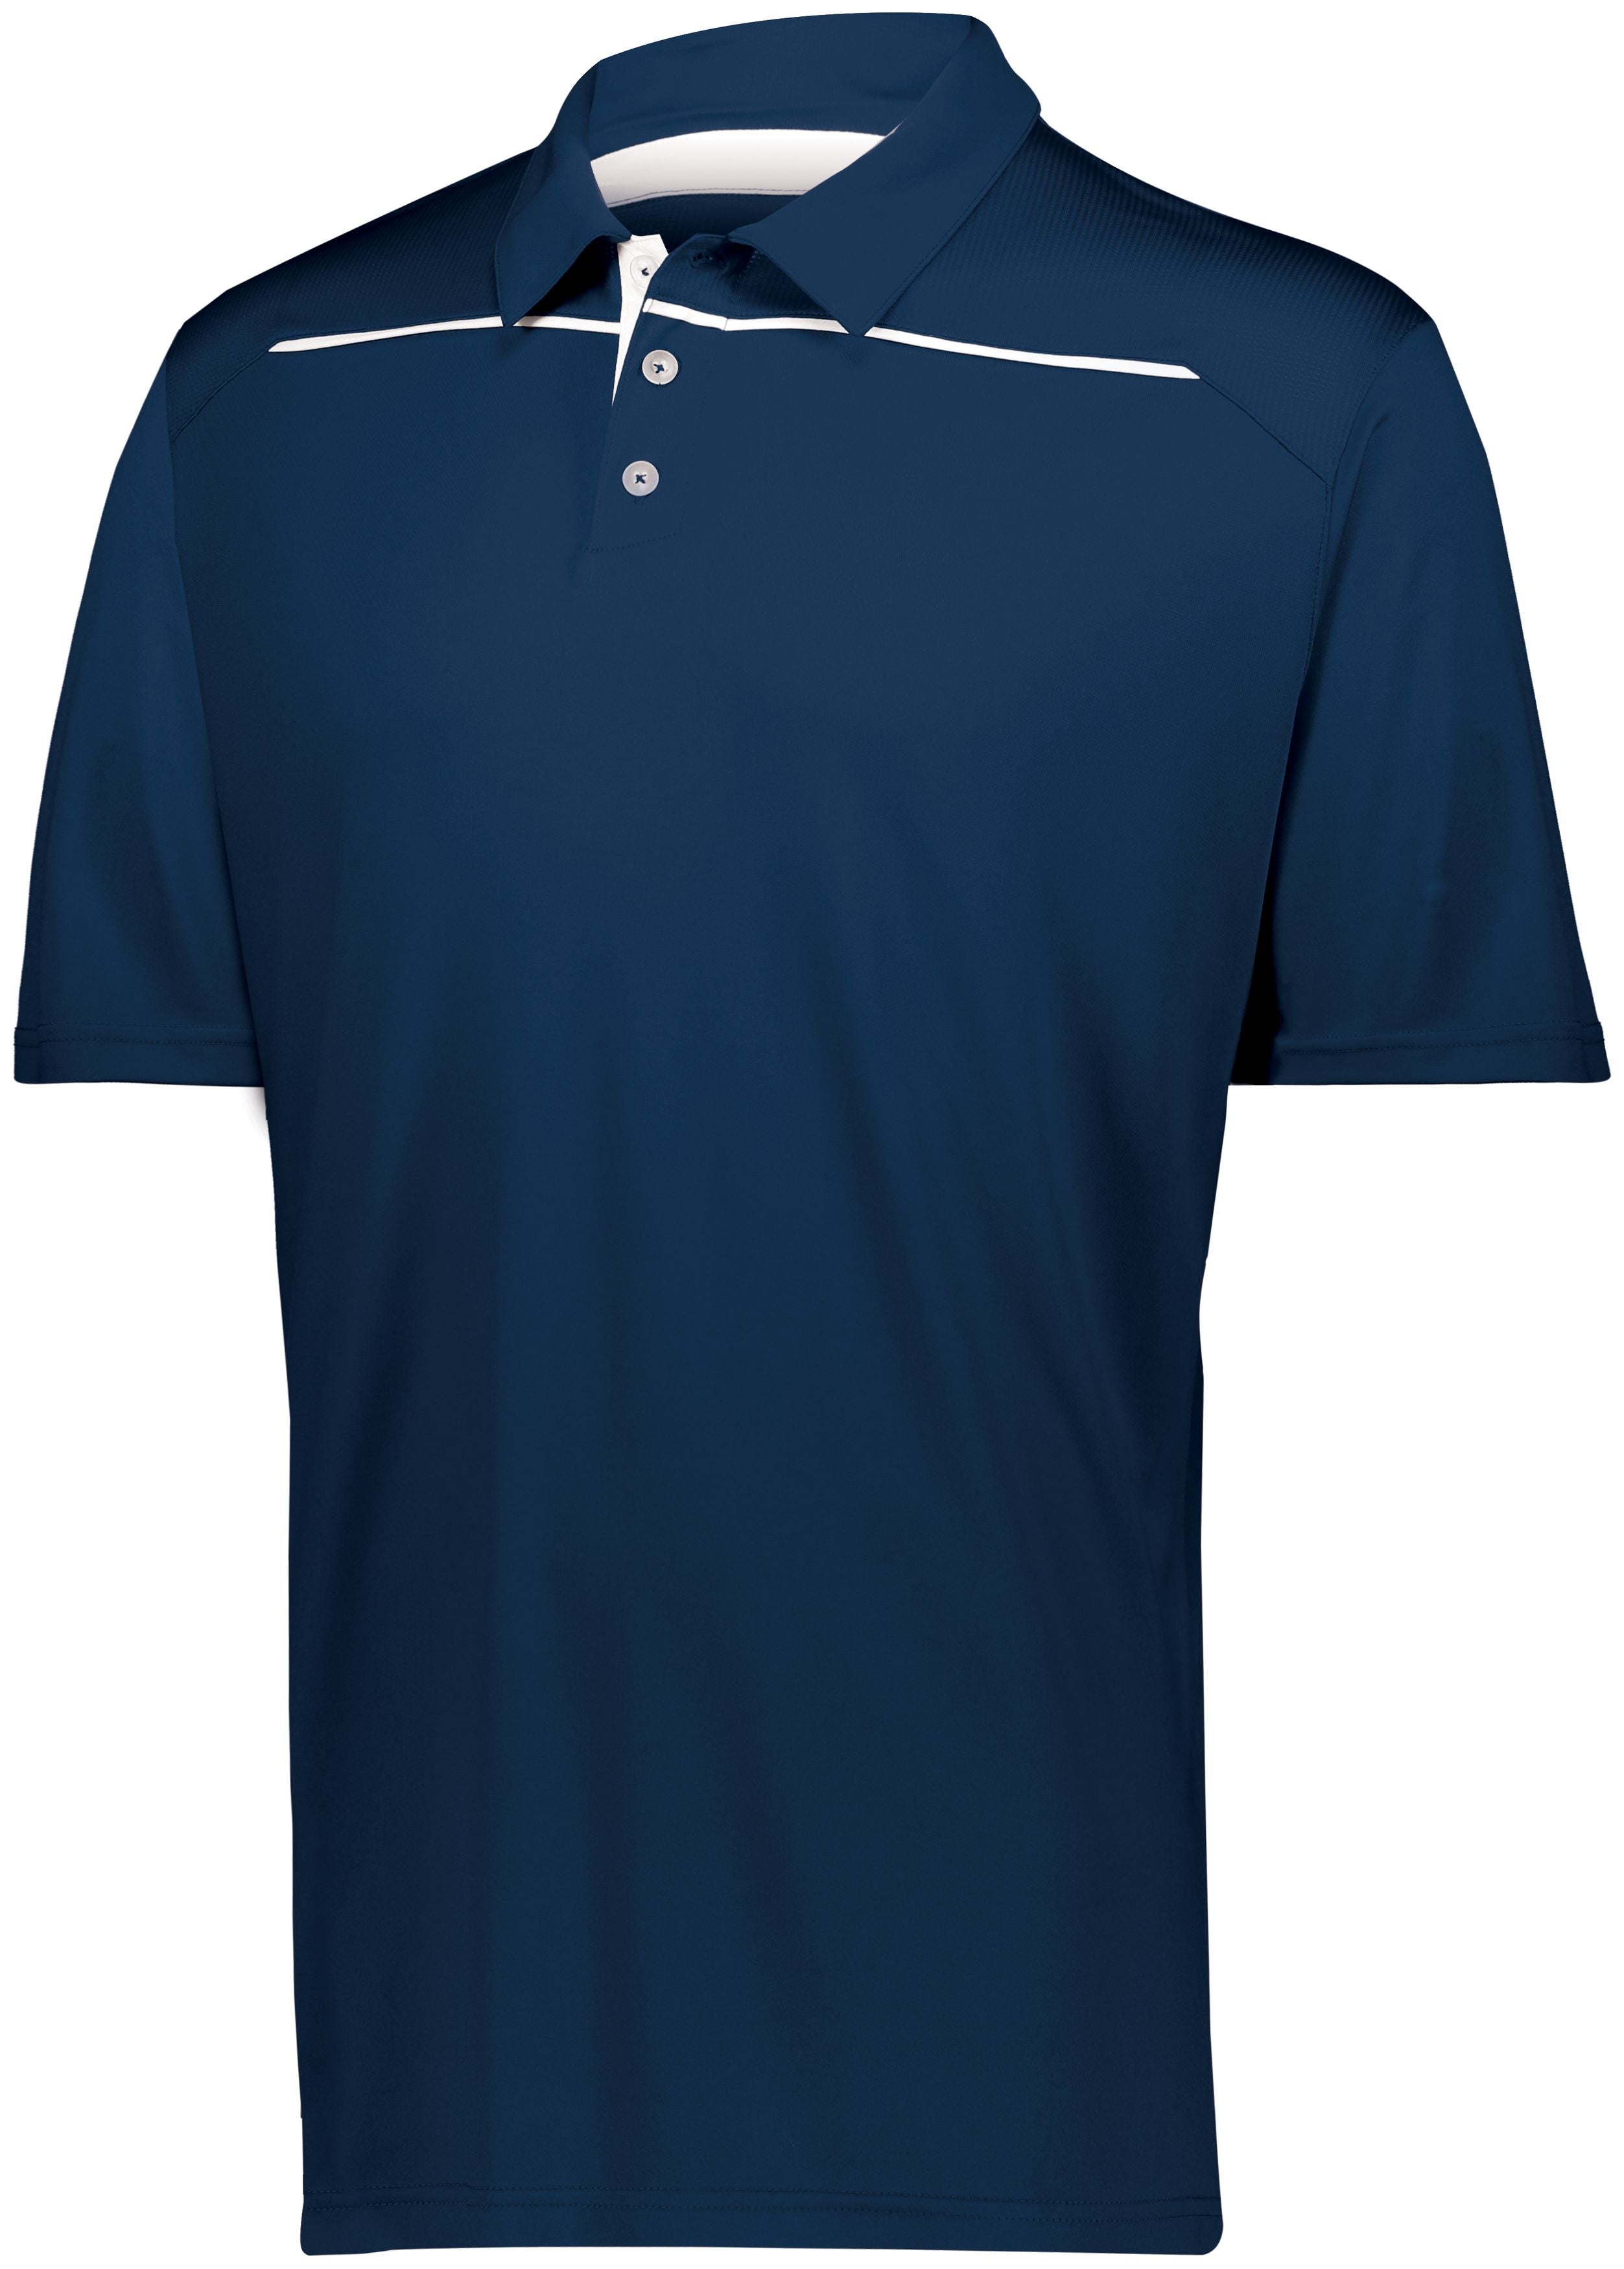 Holloway Defer Polo in Navy/White  -Part of the Adult, Adult-Polos, Polos, Holloway, Shirts product lines at KanaleyCreations.com